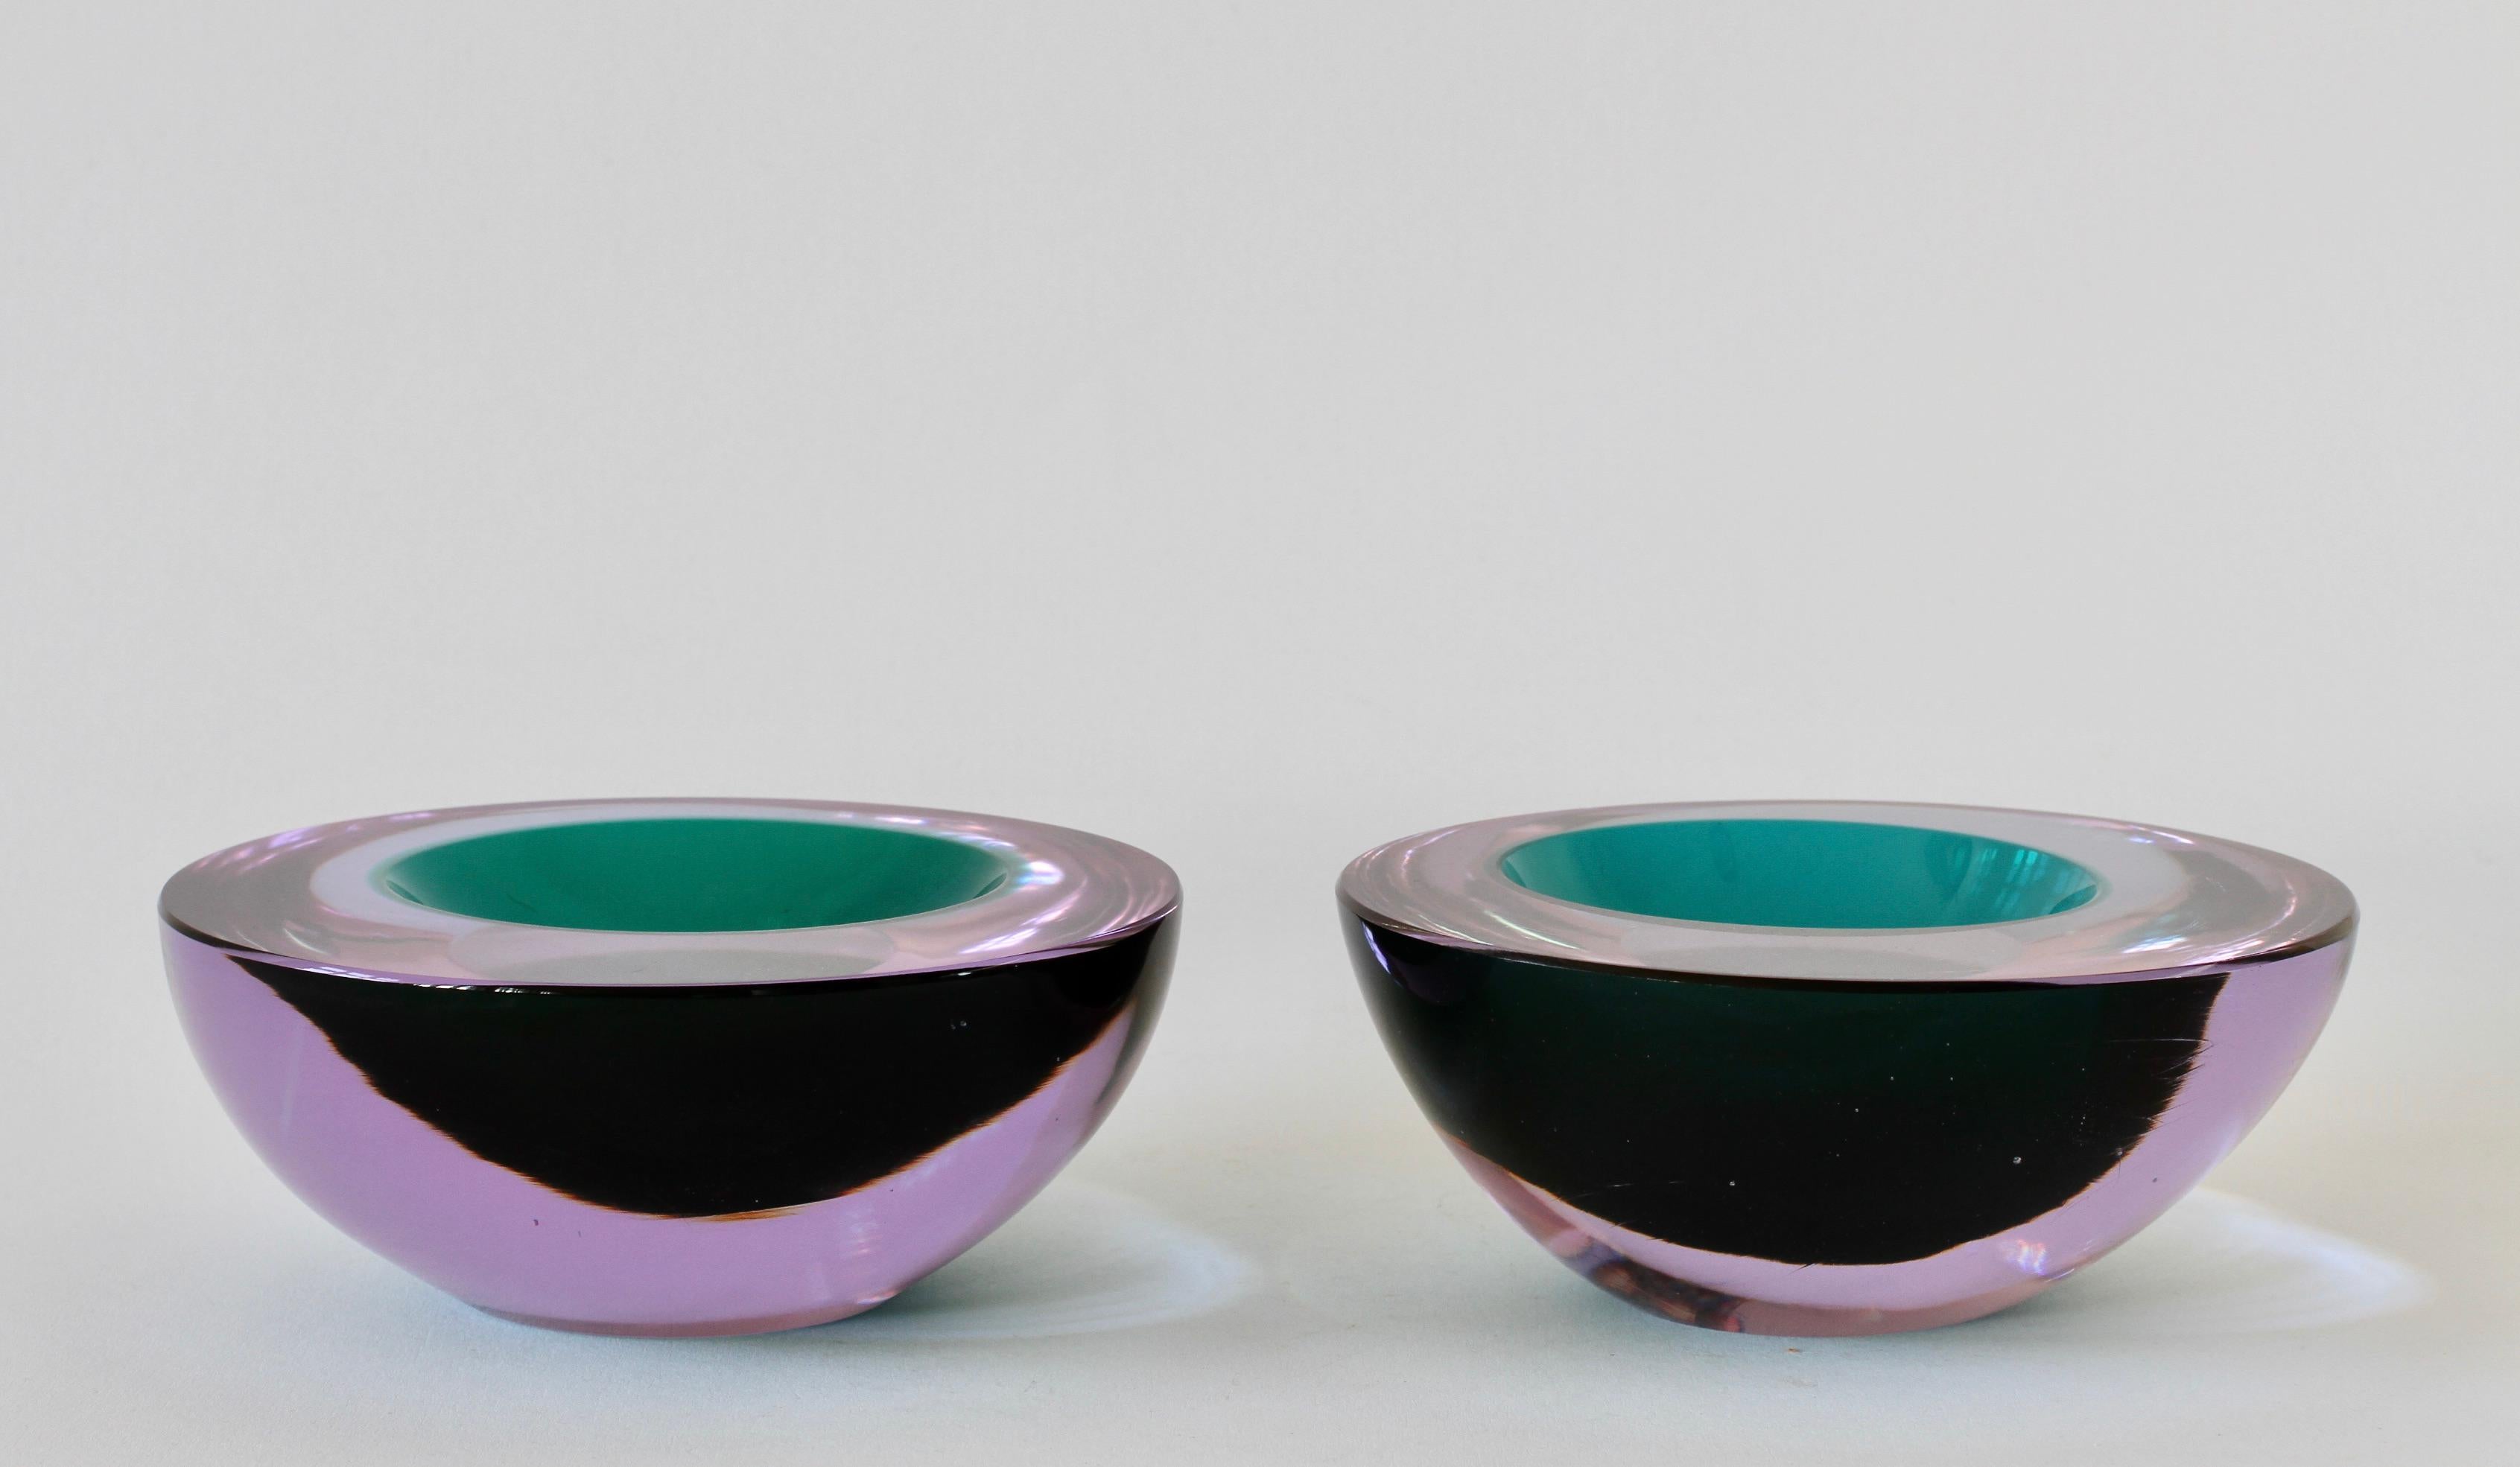 Cenedese Pair of Lilac & Green Sommerso Murano Glass Bowls, Dish or Ashtray For Sale 2